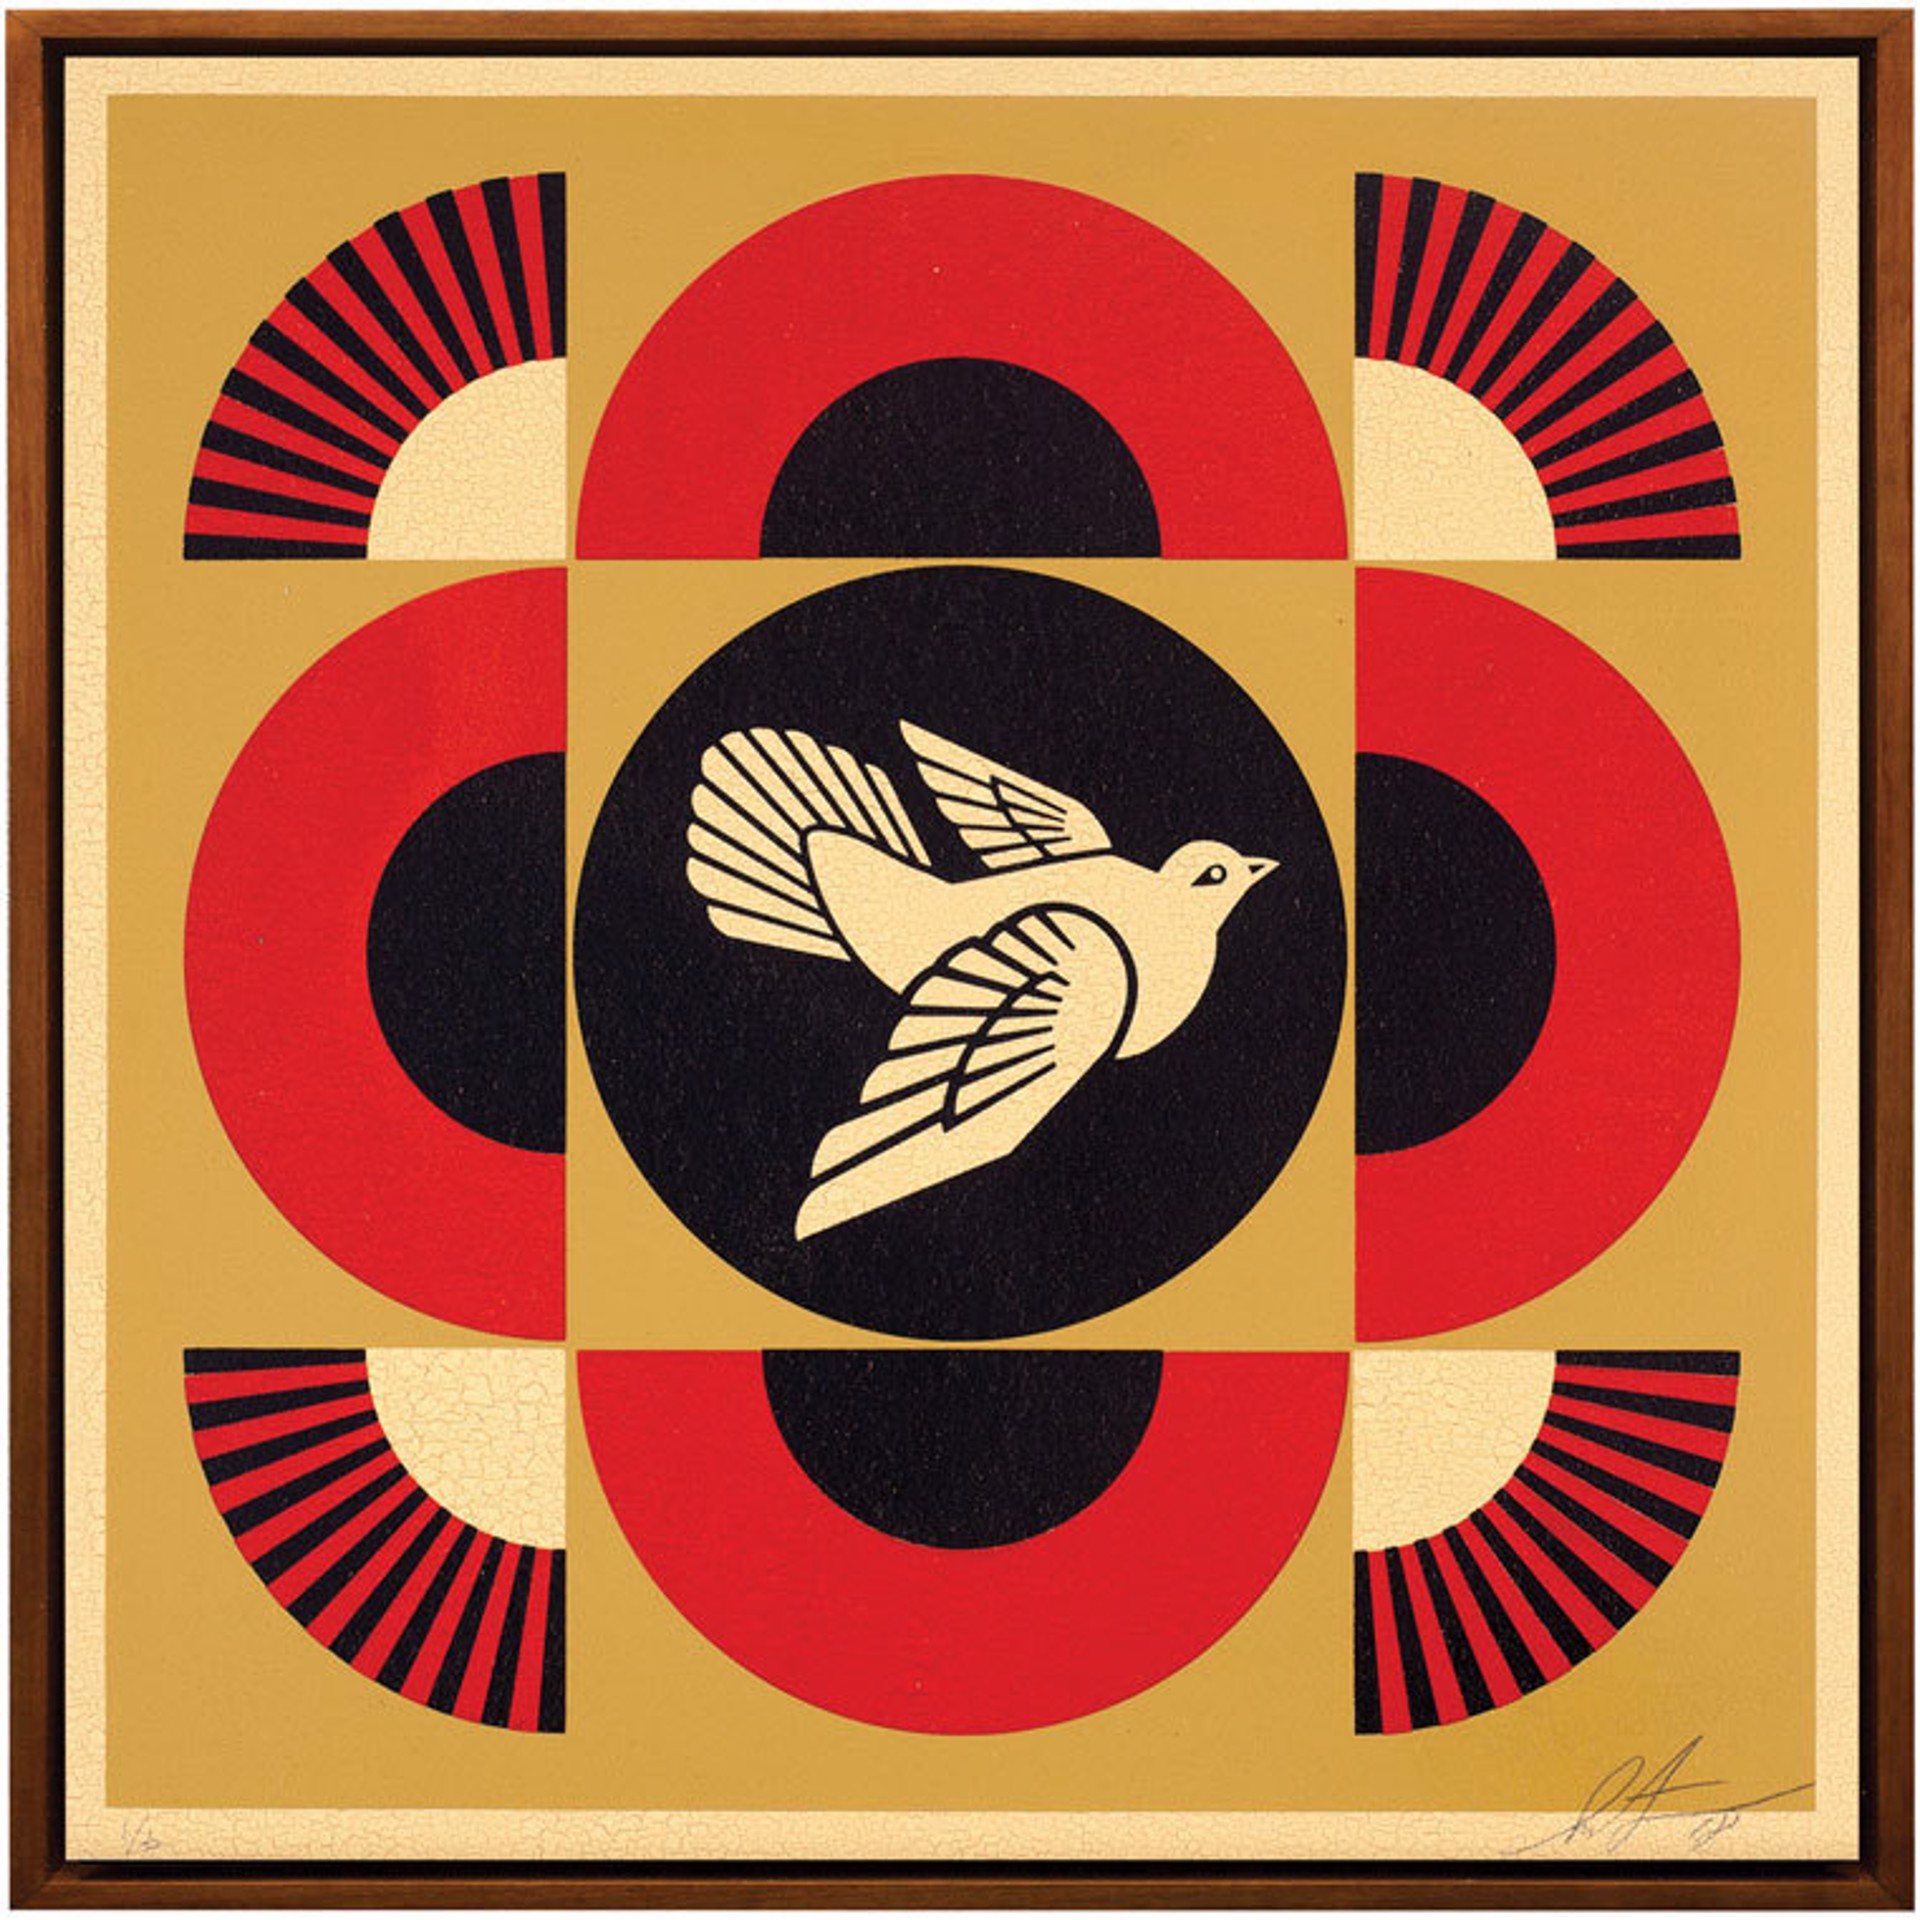 Dove Geometric (Red) by Shepard Fairey